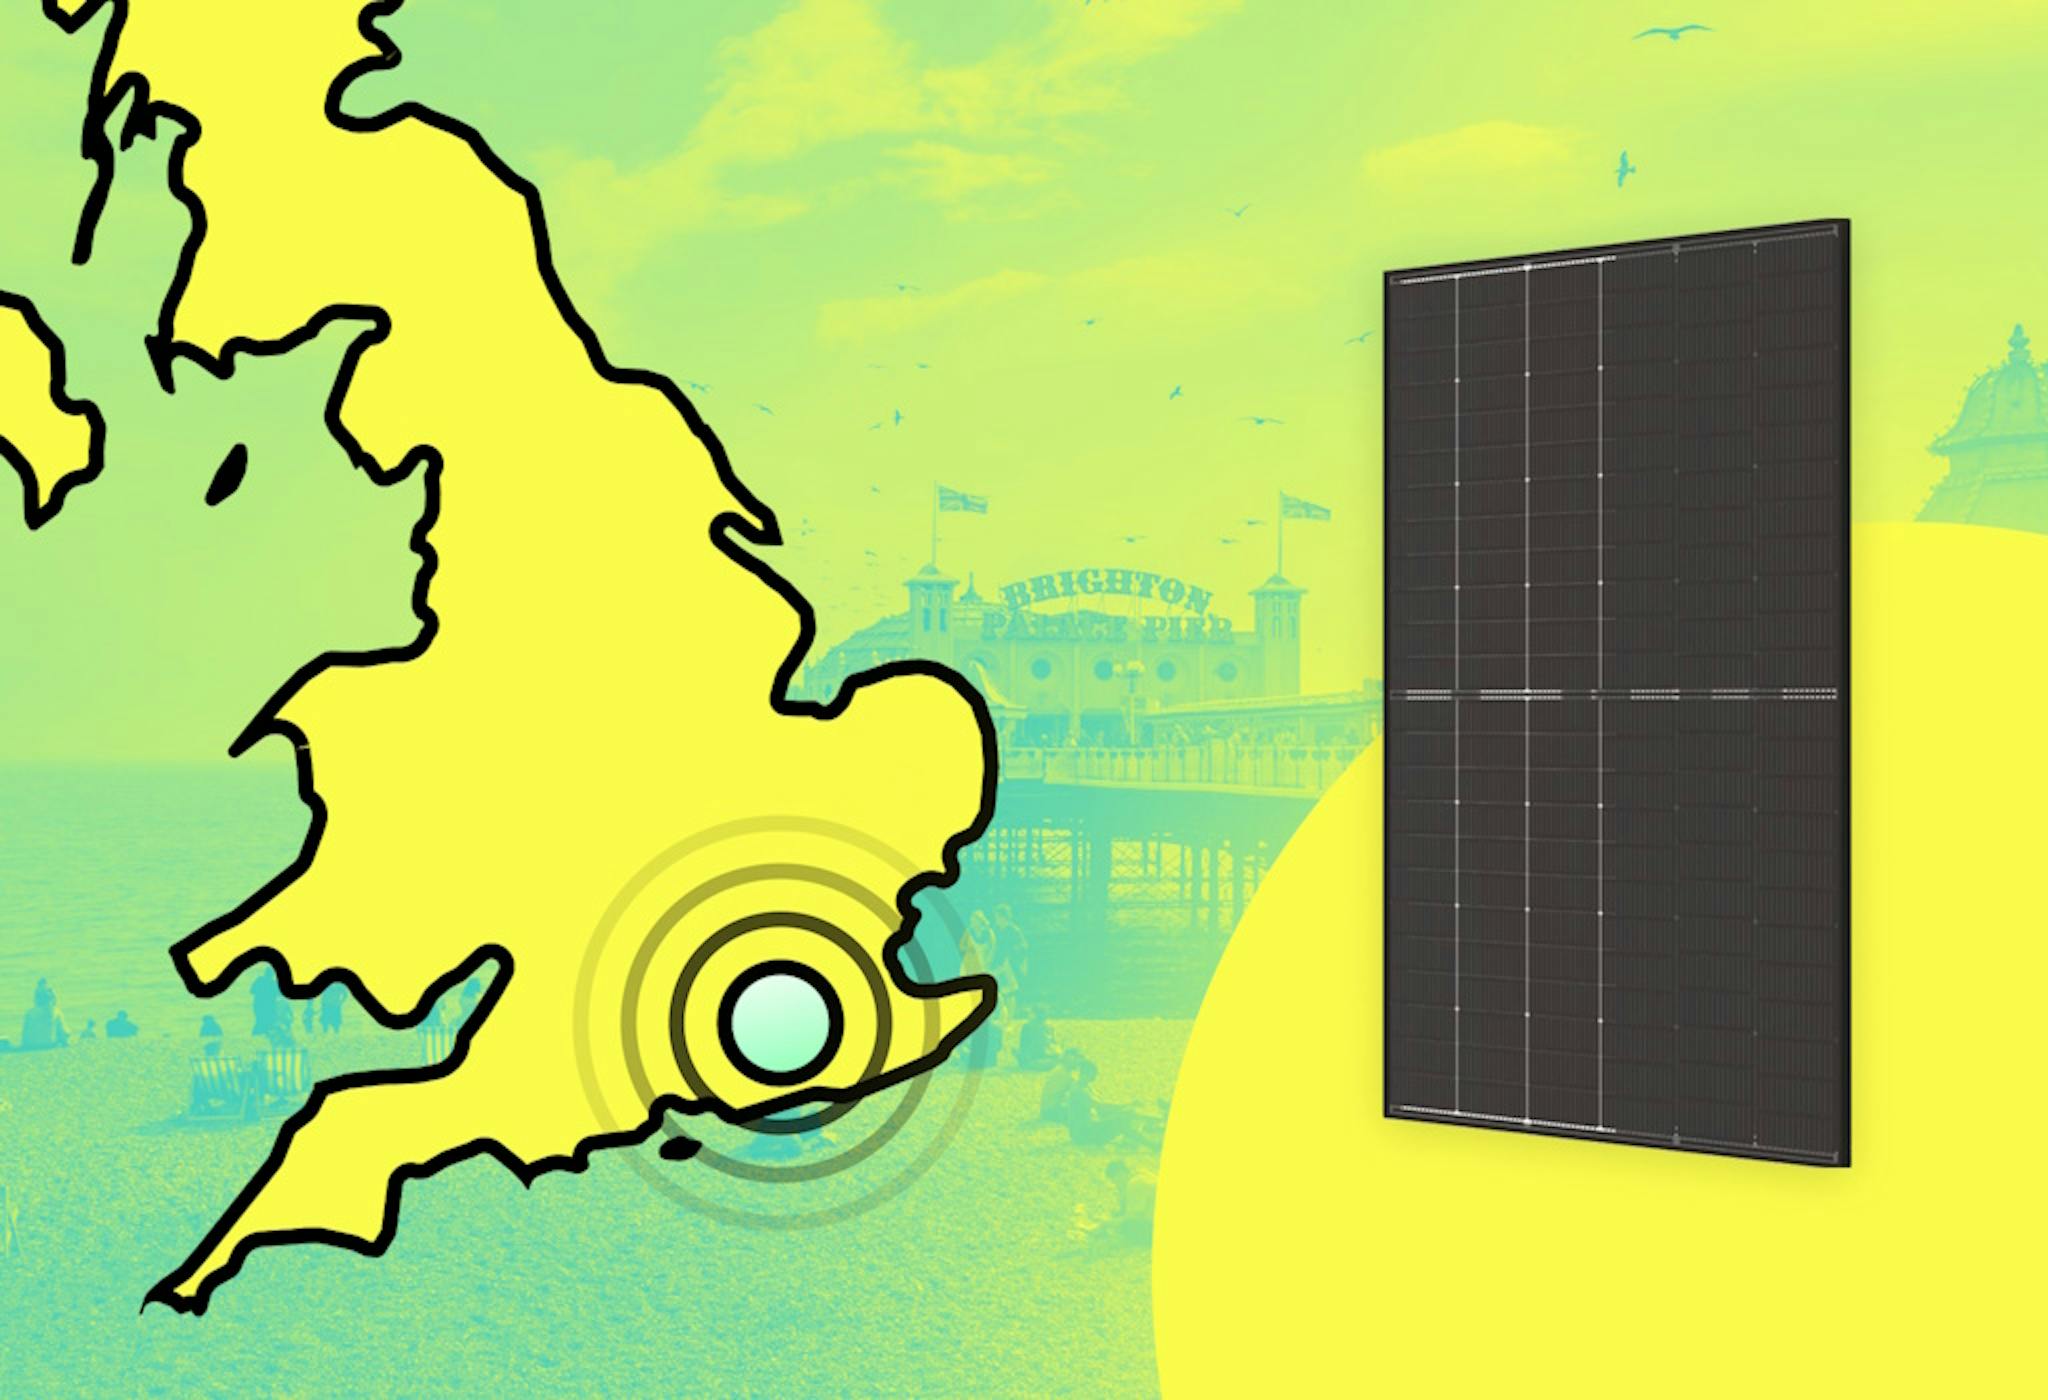 A graphic that has a cut-off map of the United Kingdom on the left with concentric circles emanating from Sussex, and a photo of a black solar panel on the right. The UK is yellow and outlined in black, and the background of the image is a photo of the Brighton Palace Pier